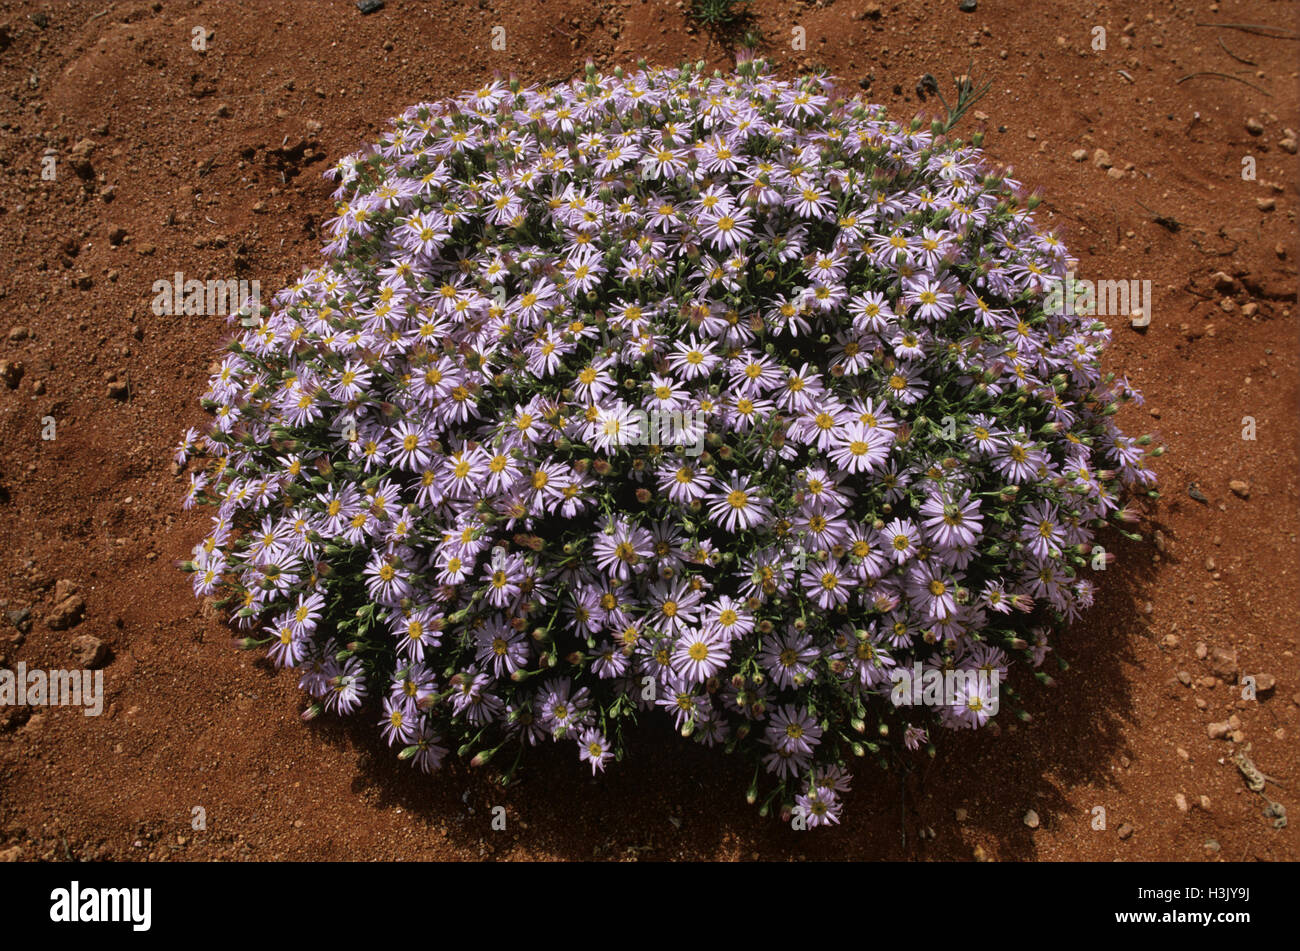 Minnie daisy (Minuria leptophylla) Banque D'Images